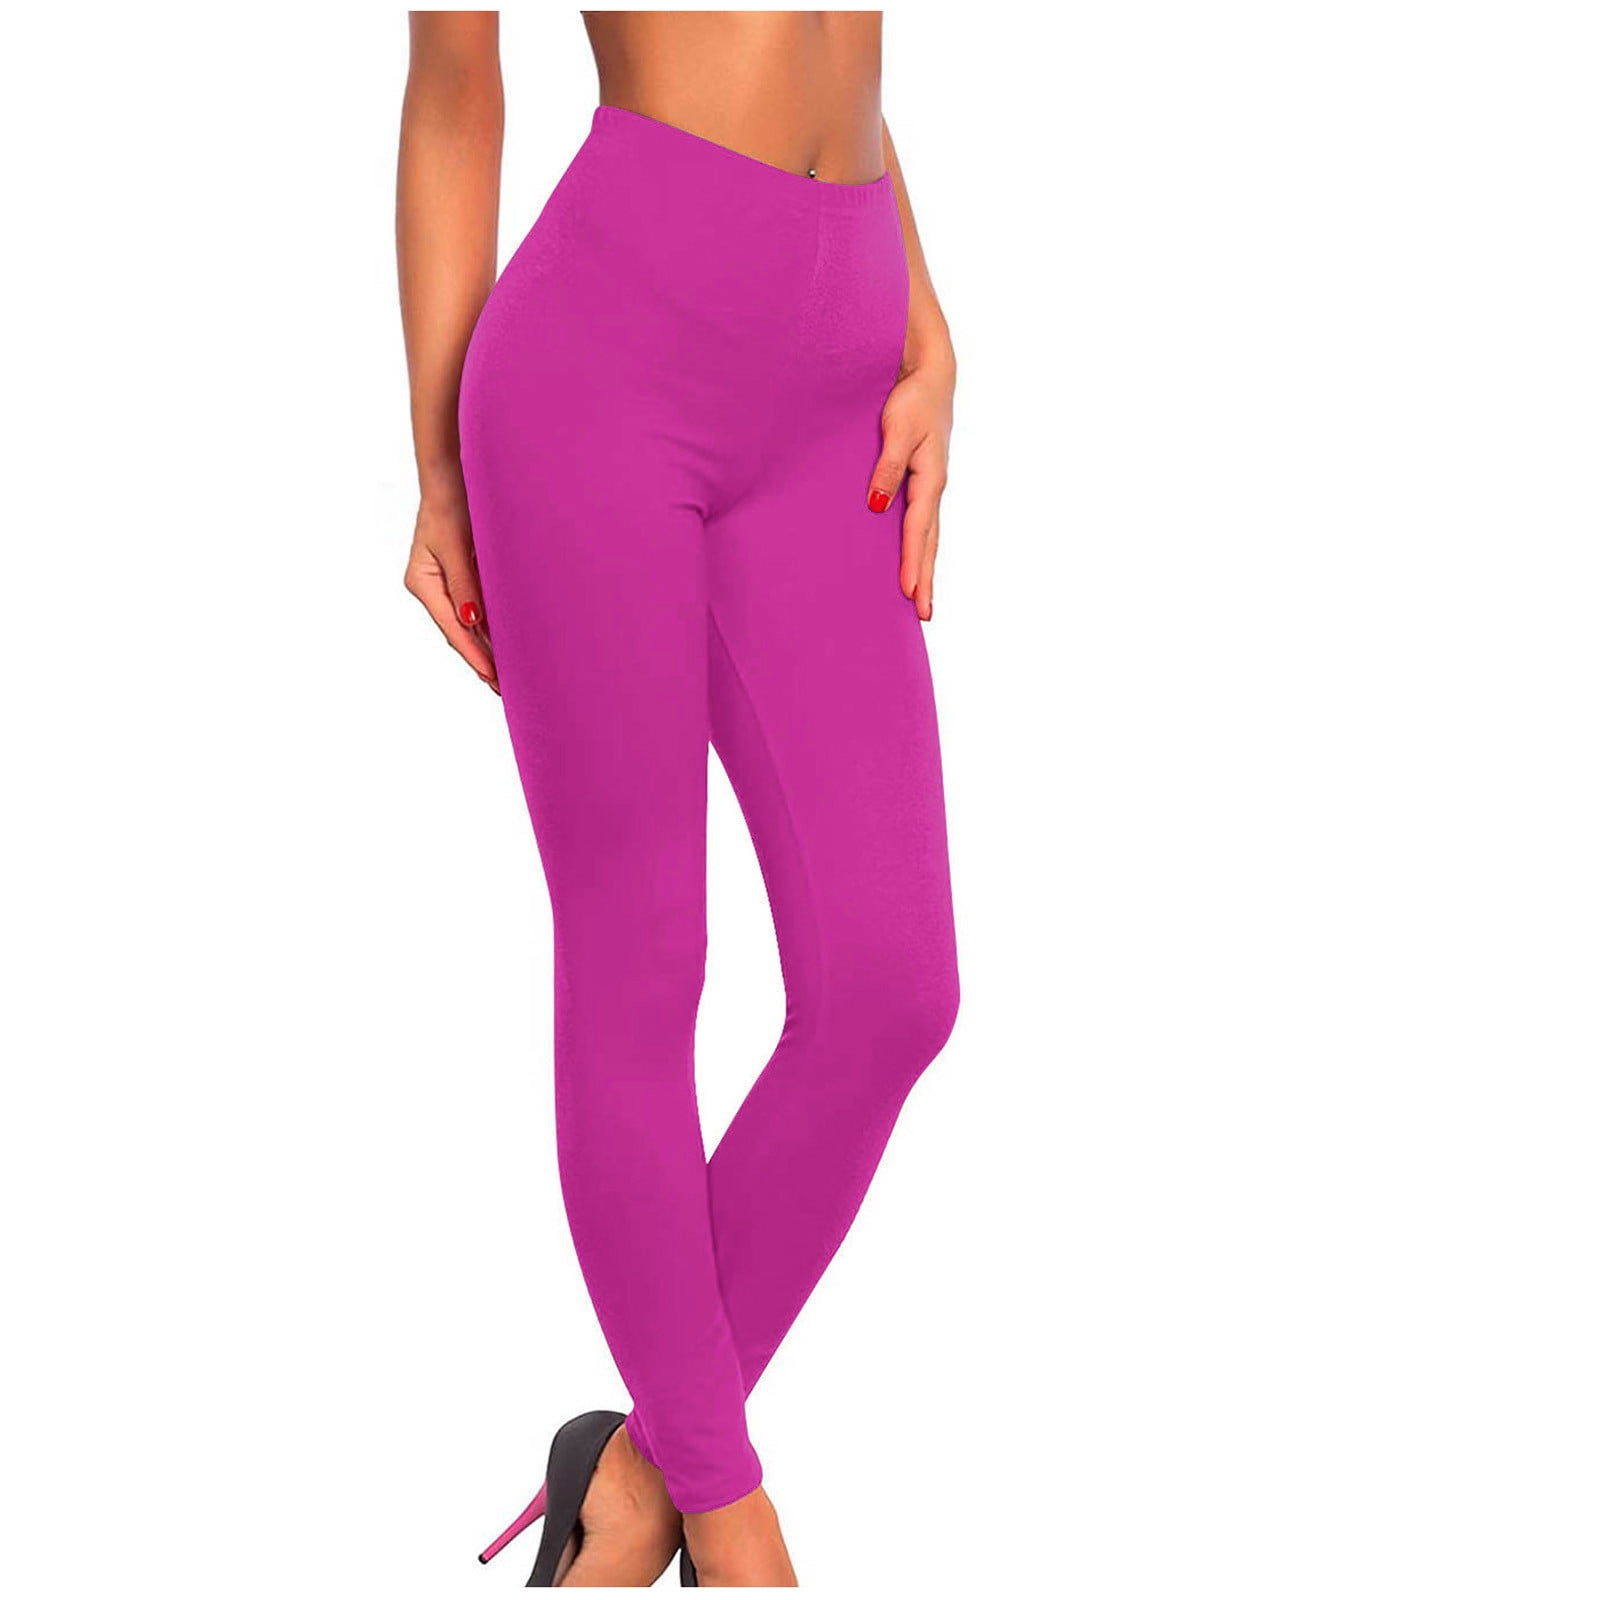 SMihono Women's Sports Fitness Pants Solid Colored CasualTight Fitting  Tight Peach Hip Yoga Pants Stretch Pants Full Length Trousers Leggings for